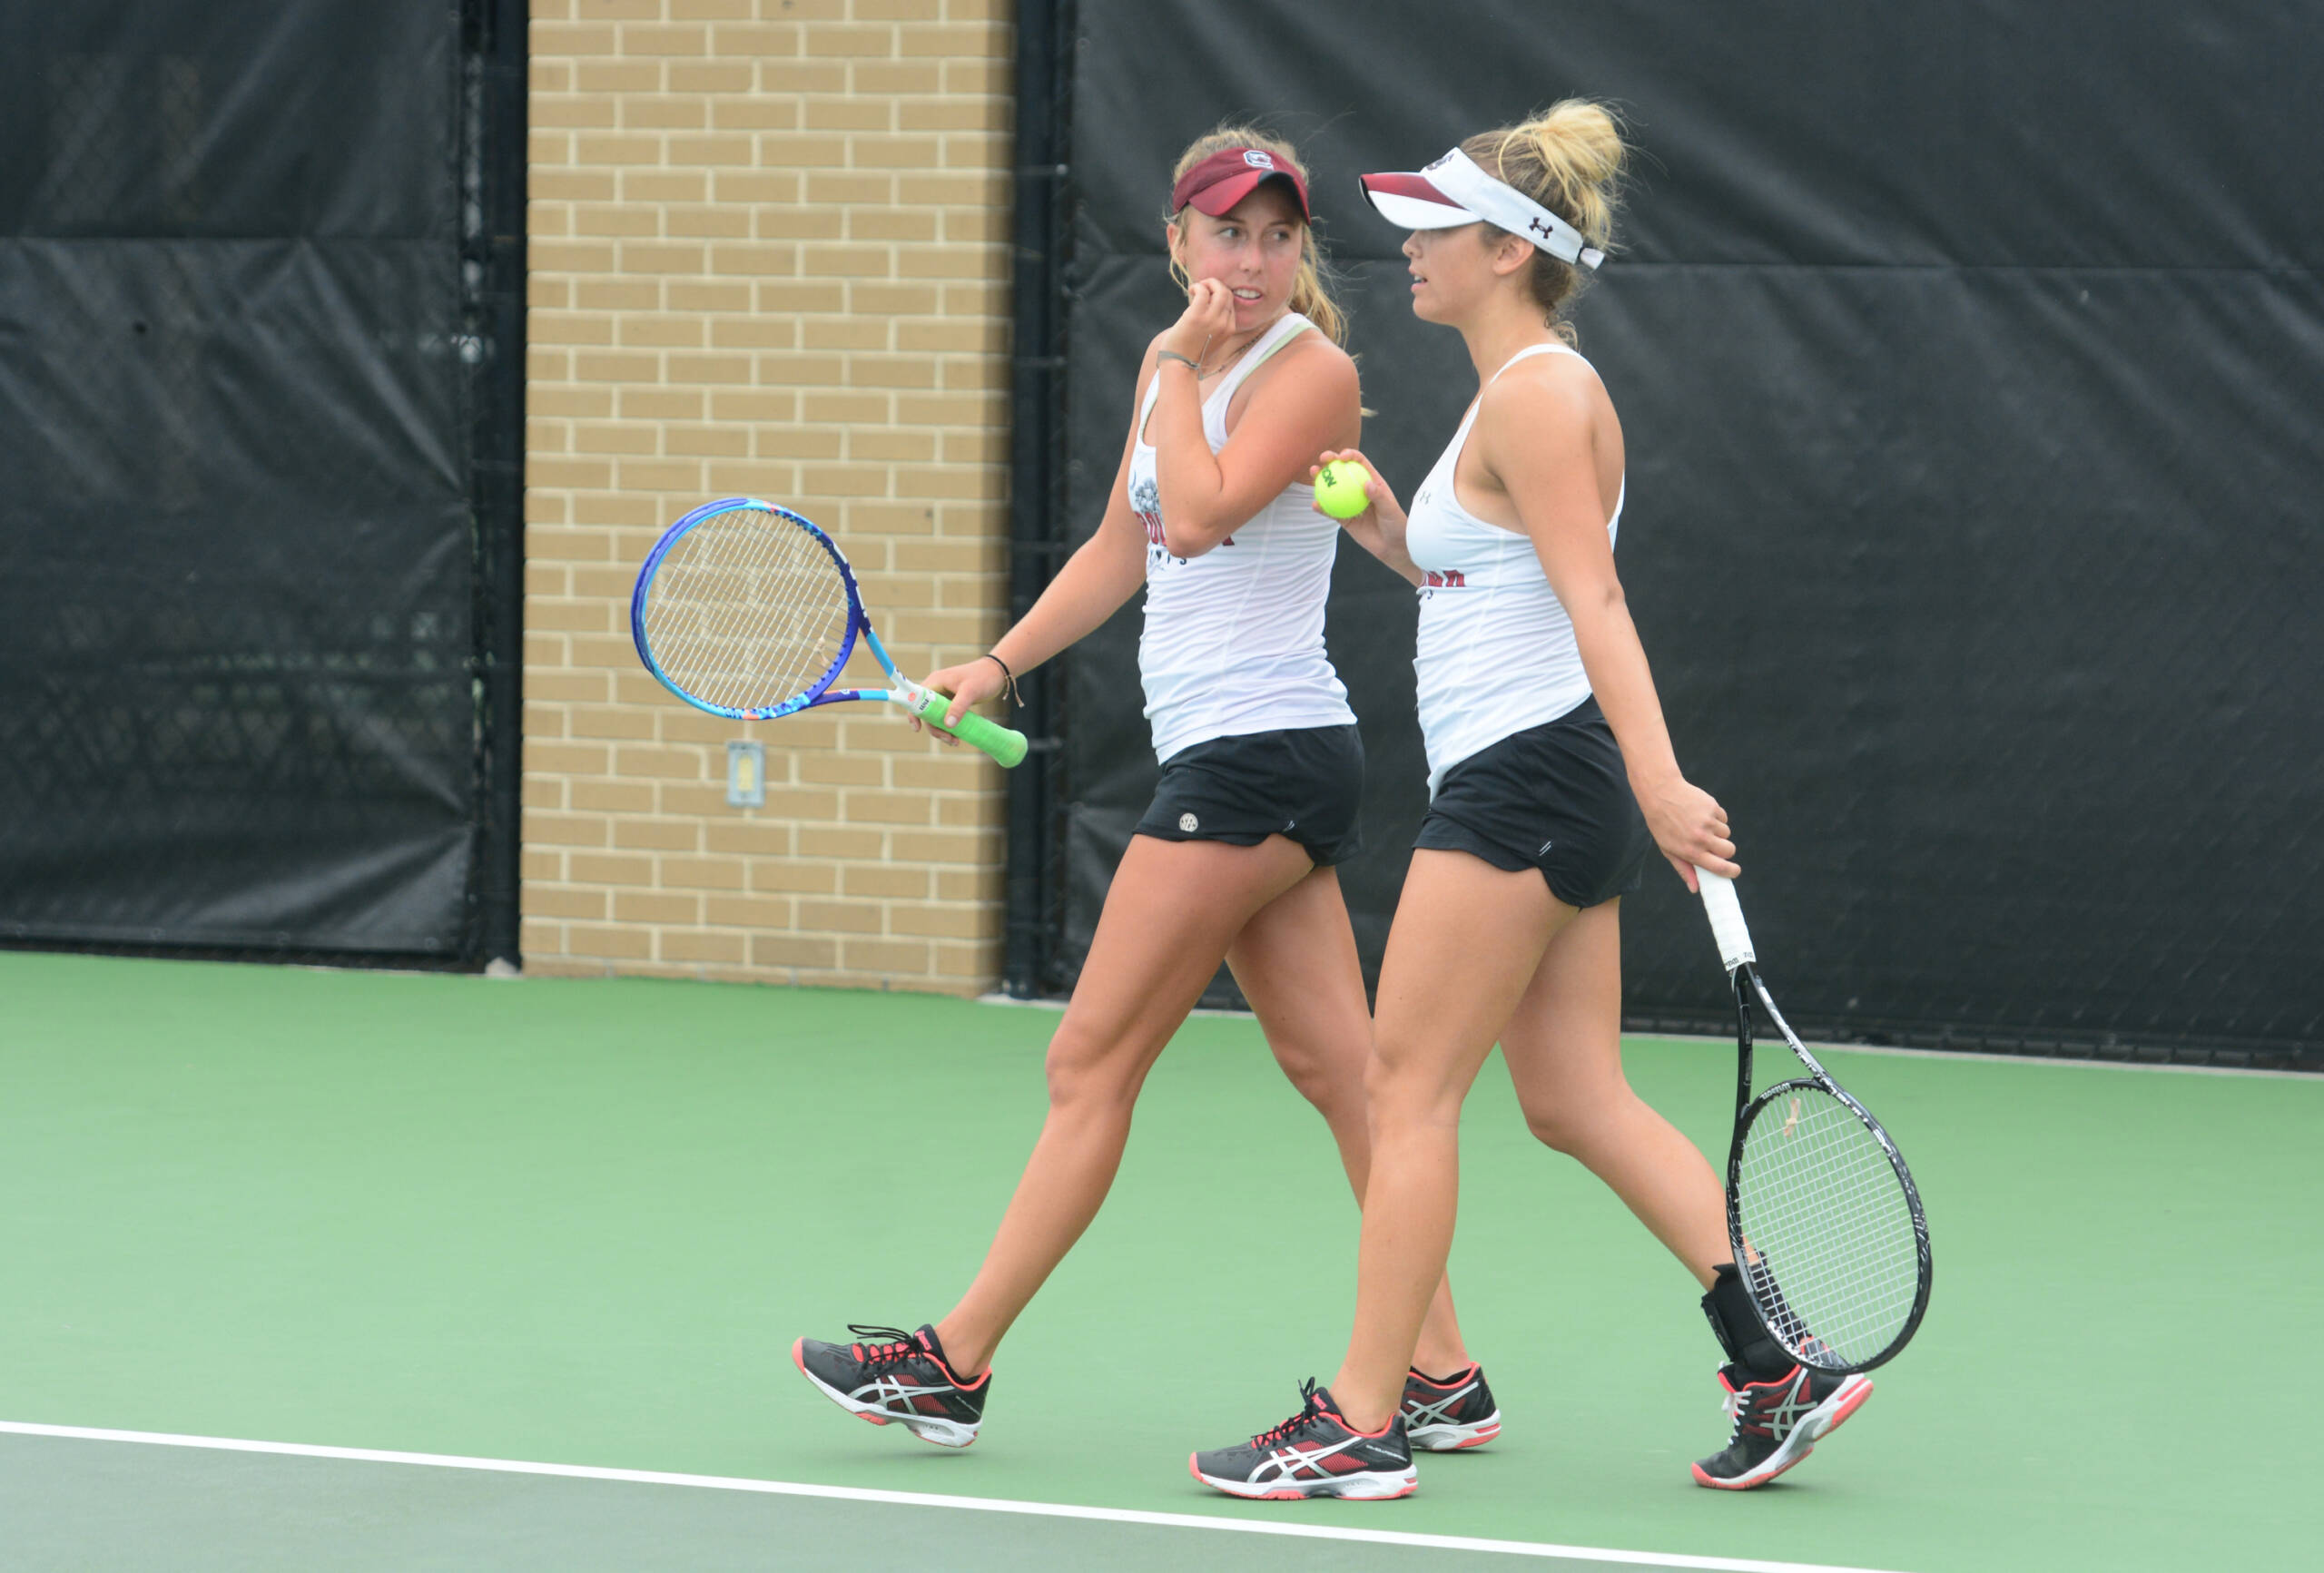 Berg/Cline Fall in Round of 16